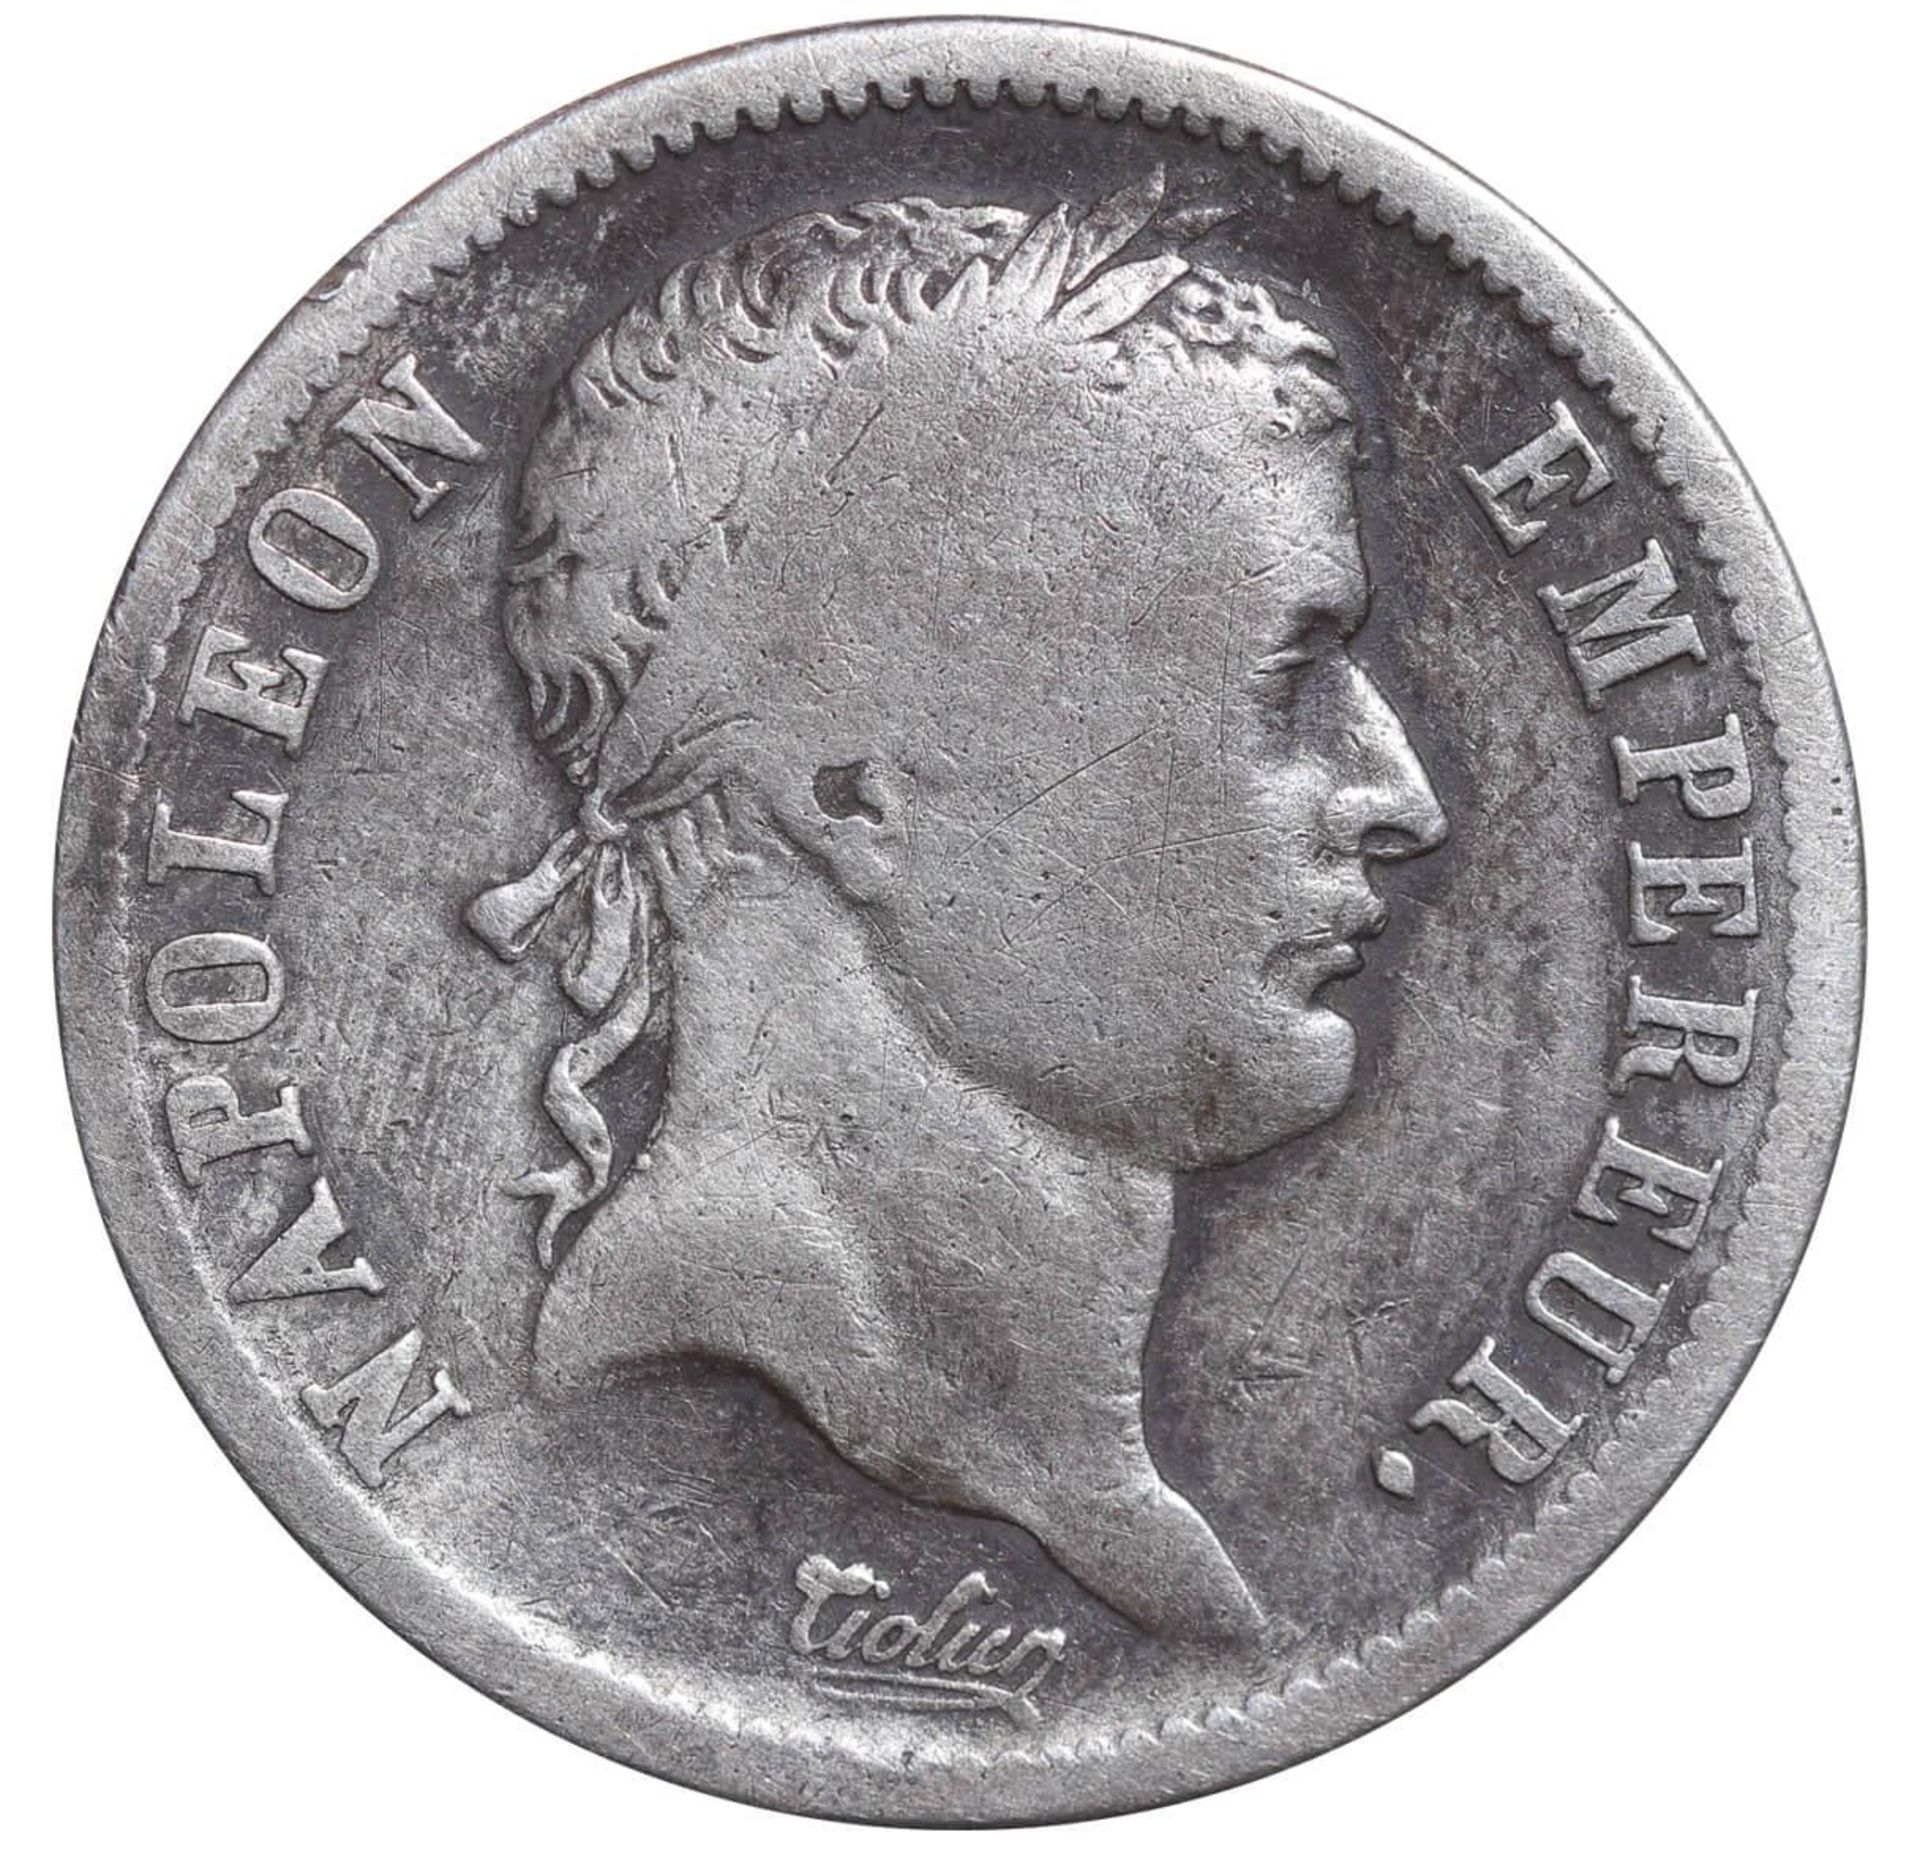 France, 2 Francs, 1814 year, A - Image 2 of 3